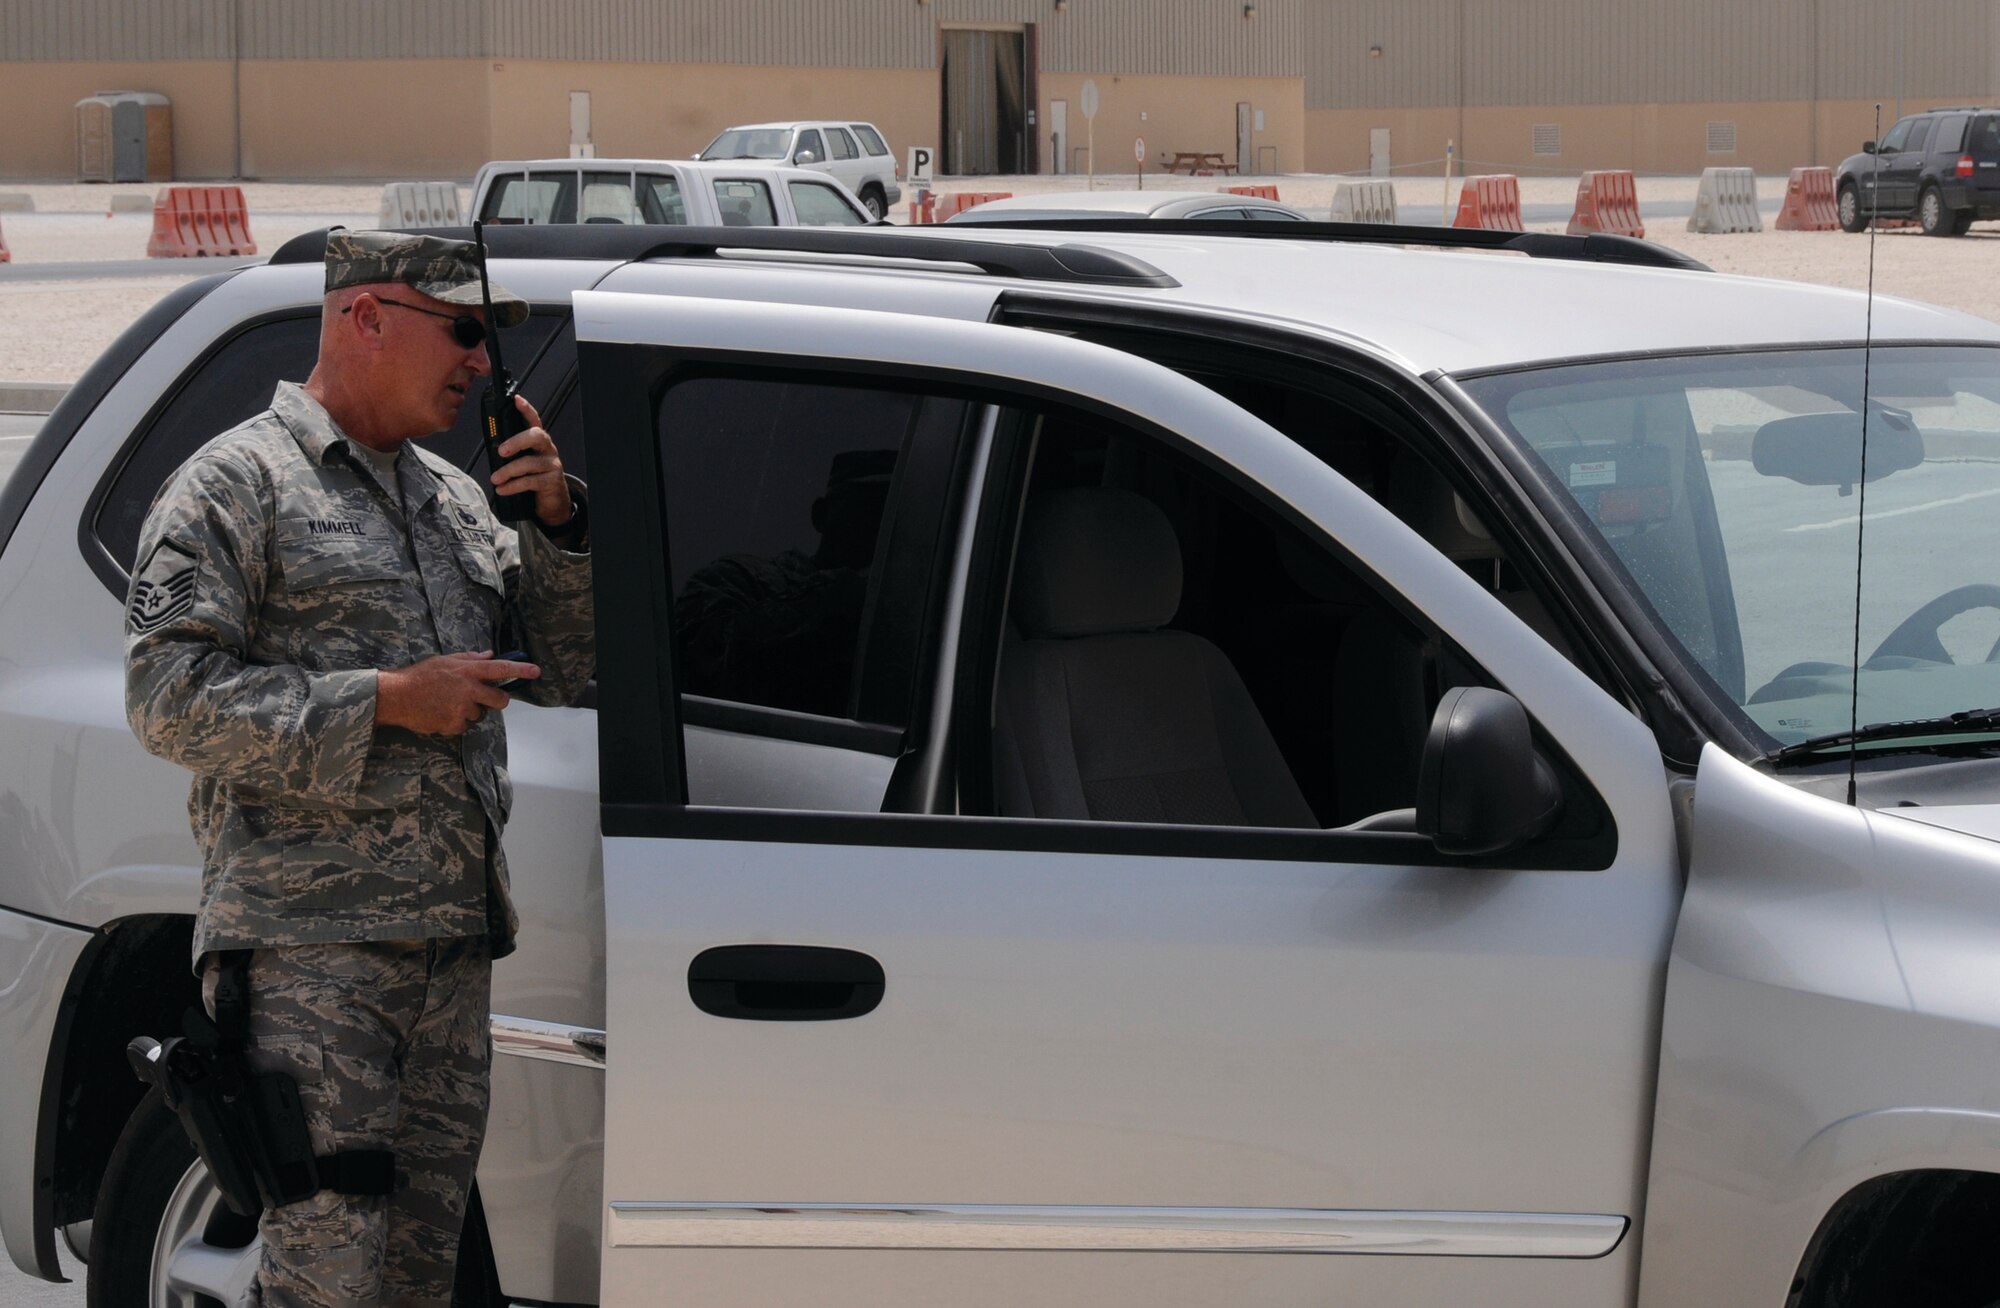 Master Sgt. Doug Kimmell, 379th Expeditionary Security Forces Squadron, Det. 1, calls in a driver's information during a traffic stop while maintaining a safe defensive position Sept. 8, 2008.  Detachment members, like Sergeant Kimmell, had to use Army procedures while performing the “in lieu of” tasking. Sergeant Kimmell is deployed from Stratton Air National Guard Base, Schenectady, N.Y., in support of Operations Iraqi and Enduring Freedom and Joint Task Force-Horn of Africa.  (U.S. Air Force photo by Tech. Sgt. Michael Boquette) 